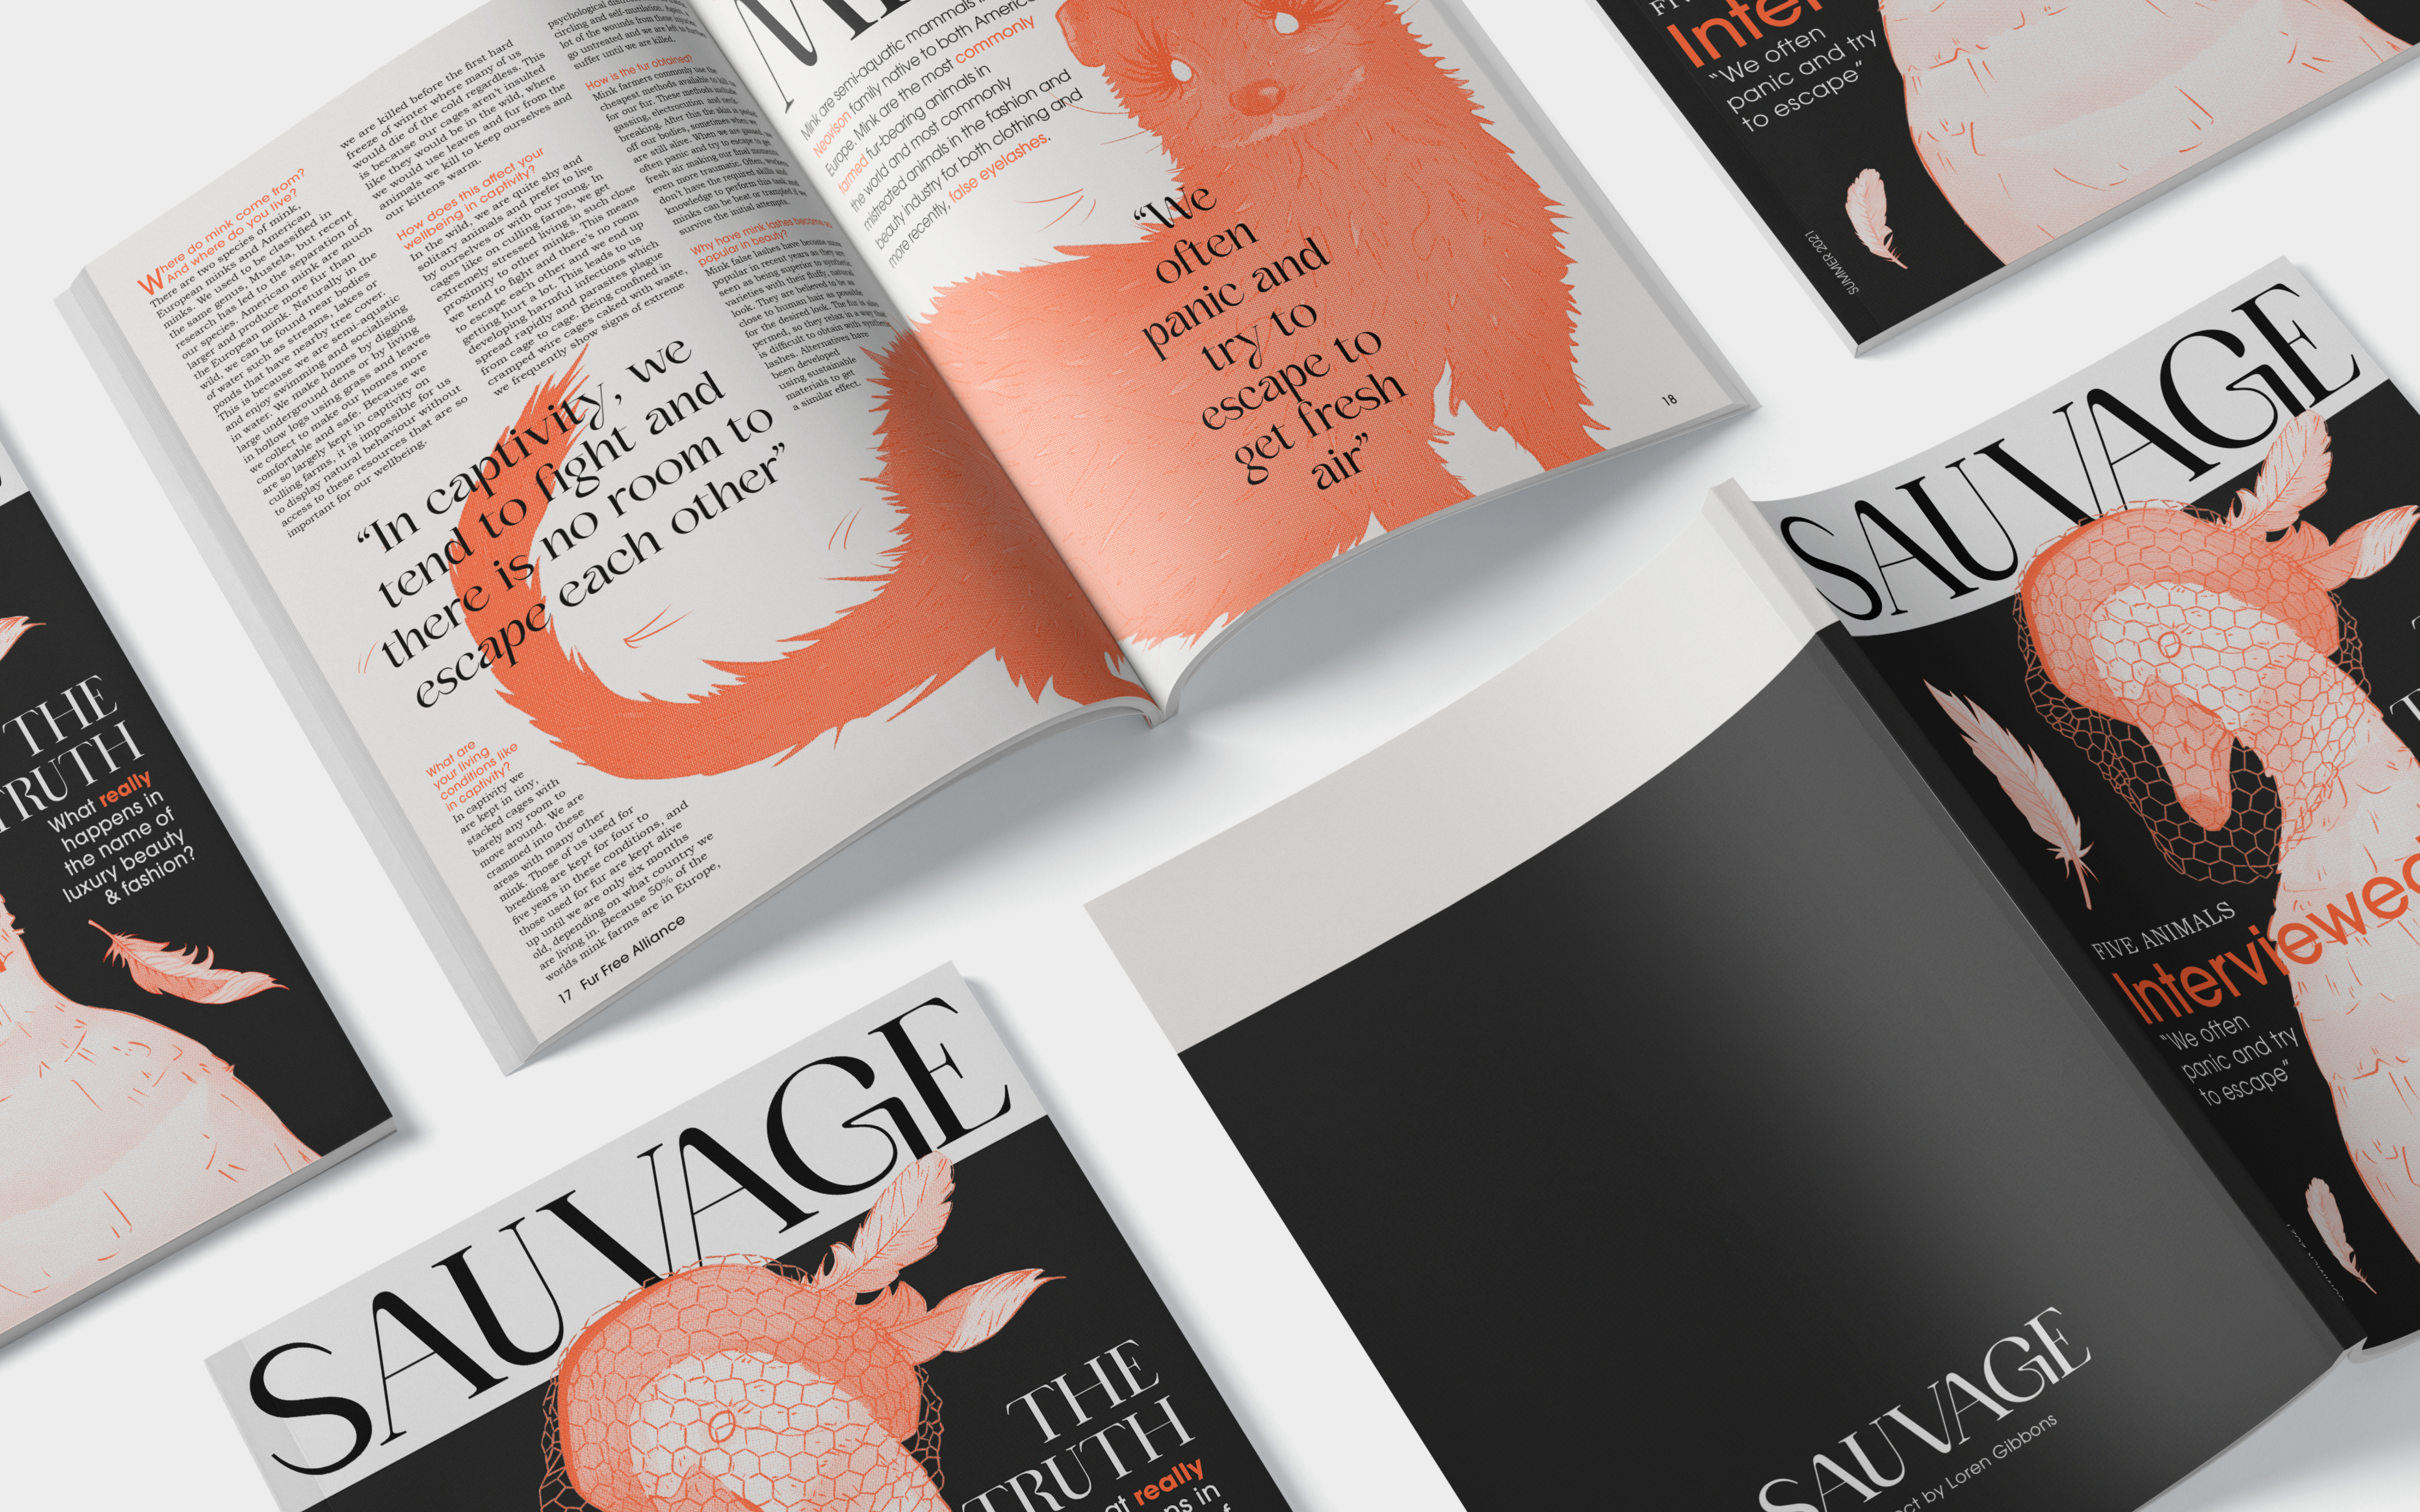 Sauvage Magazine by Loren Gibbons, 2D: Digital magazine is 8.5 X 11 inches for each page, 8.5 X 22 inch spreads. Images will be mockup jpegs.